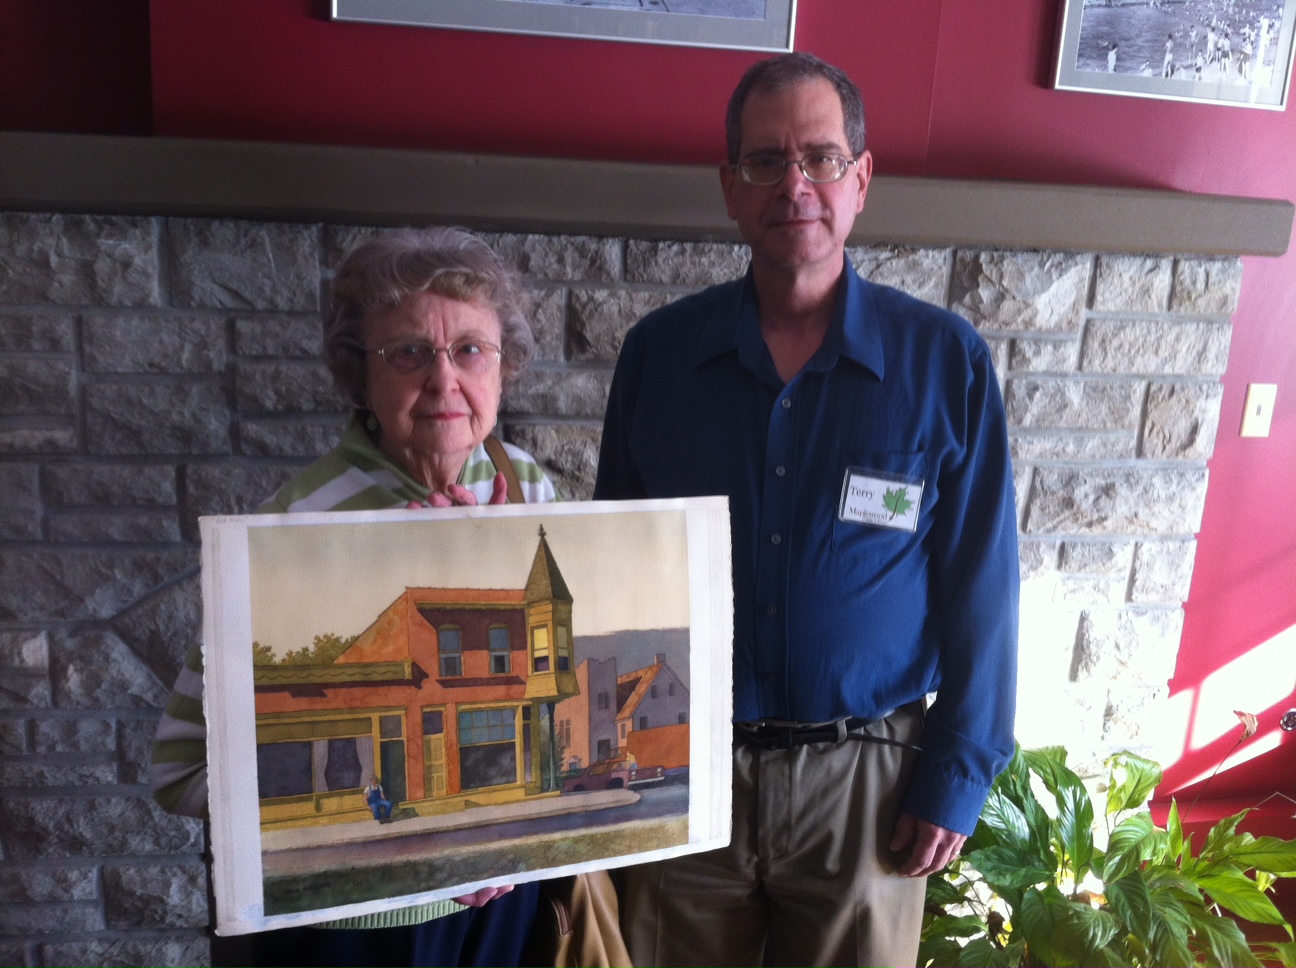 Watercolor of historic Maplewood building donated to library